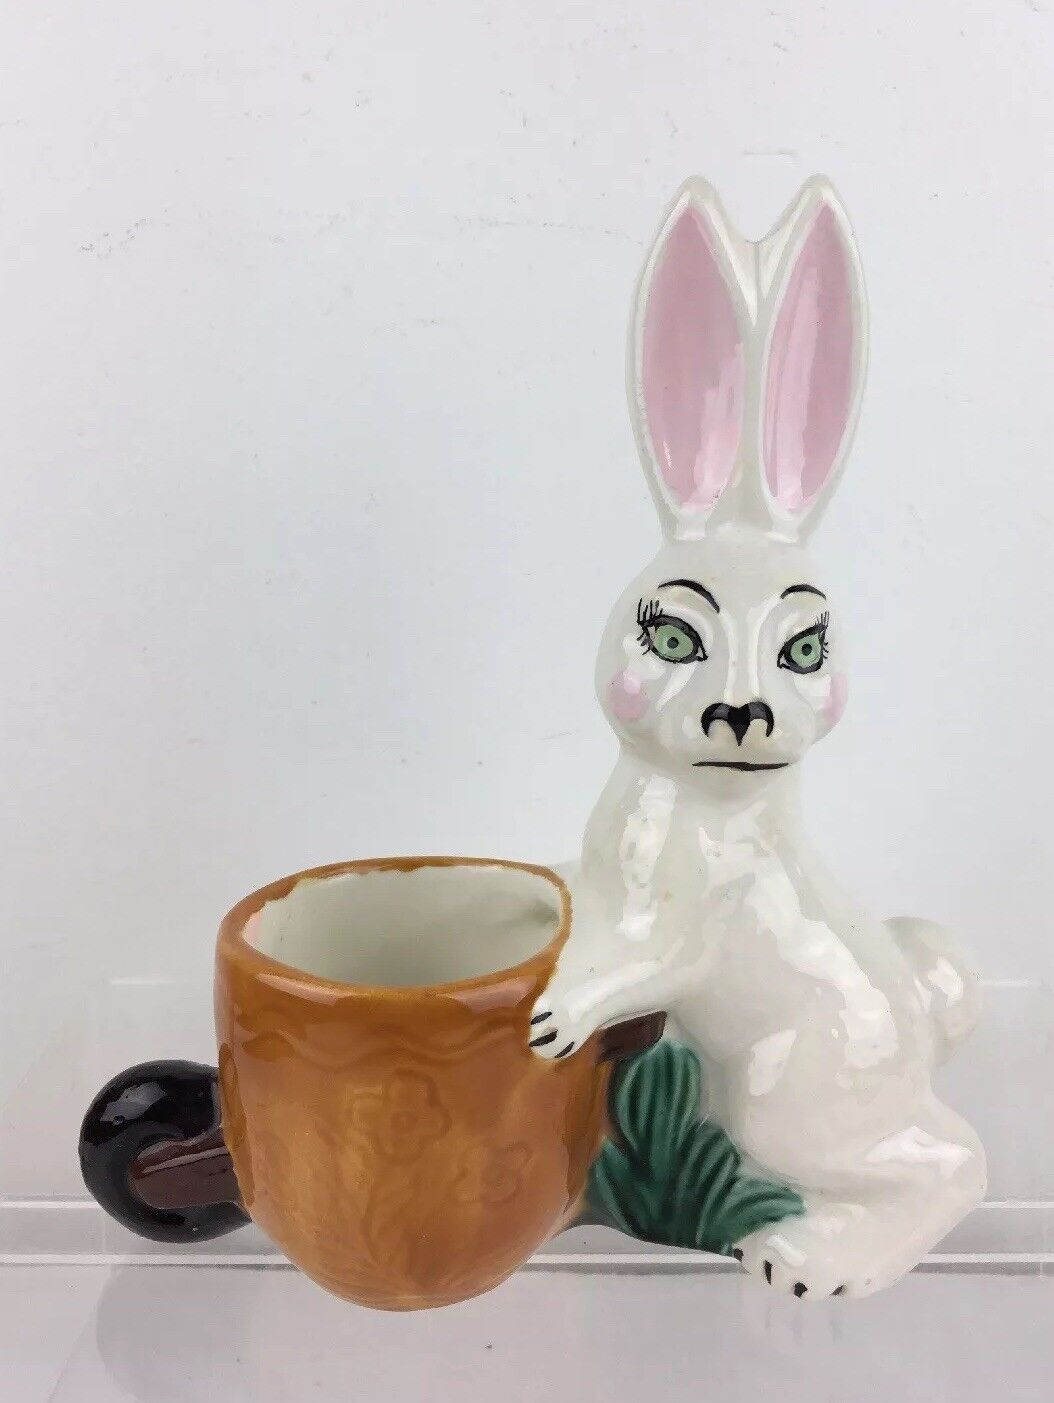 Vintage Handmade Pottery Ceramic Rabbit with Wheelbarrow Planter or Easter Candy